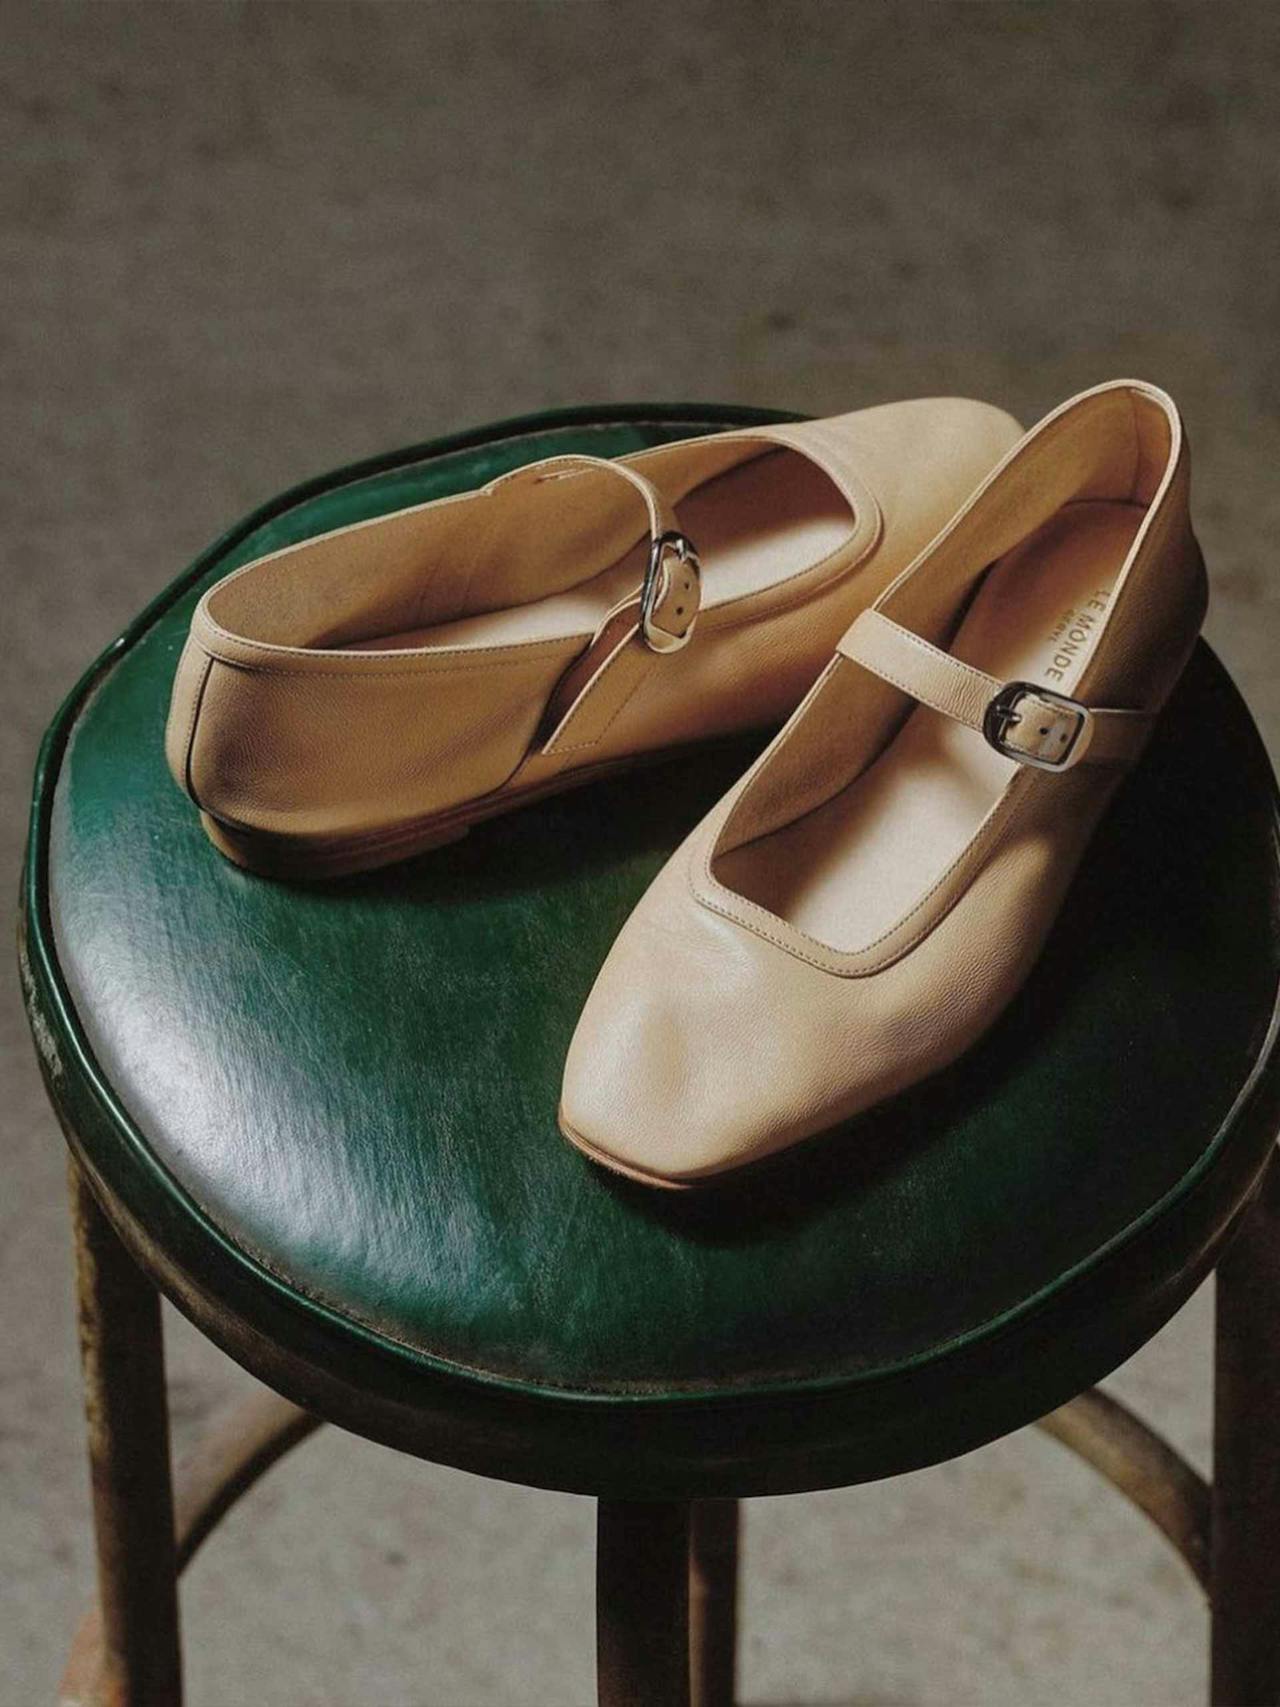 Discover Le Monde Beryl shoes and accessories with Collagerie. Free returns within 28 days. From Mary Janes and Venetian gondolier slippers to gorgeous velvet bags | Collagerie.com